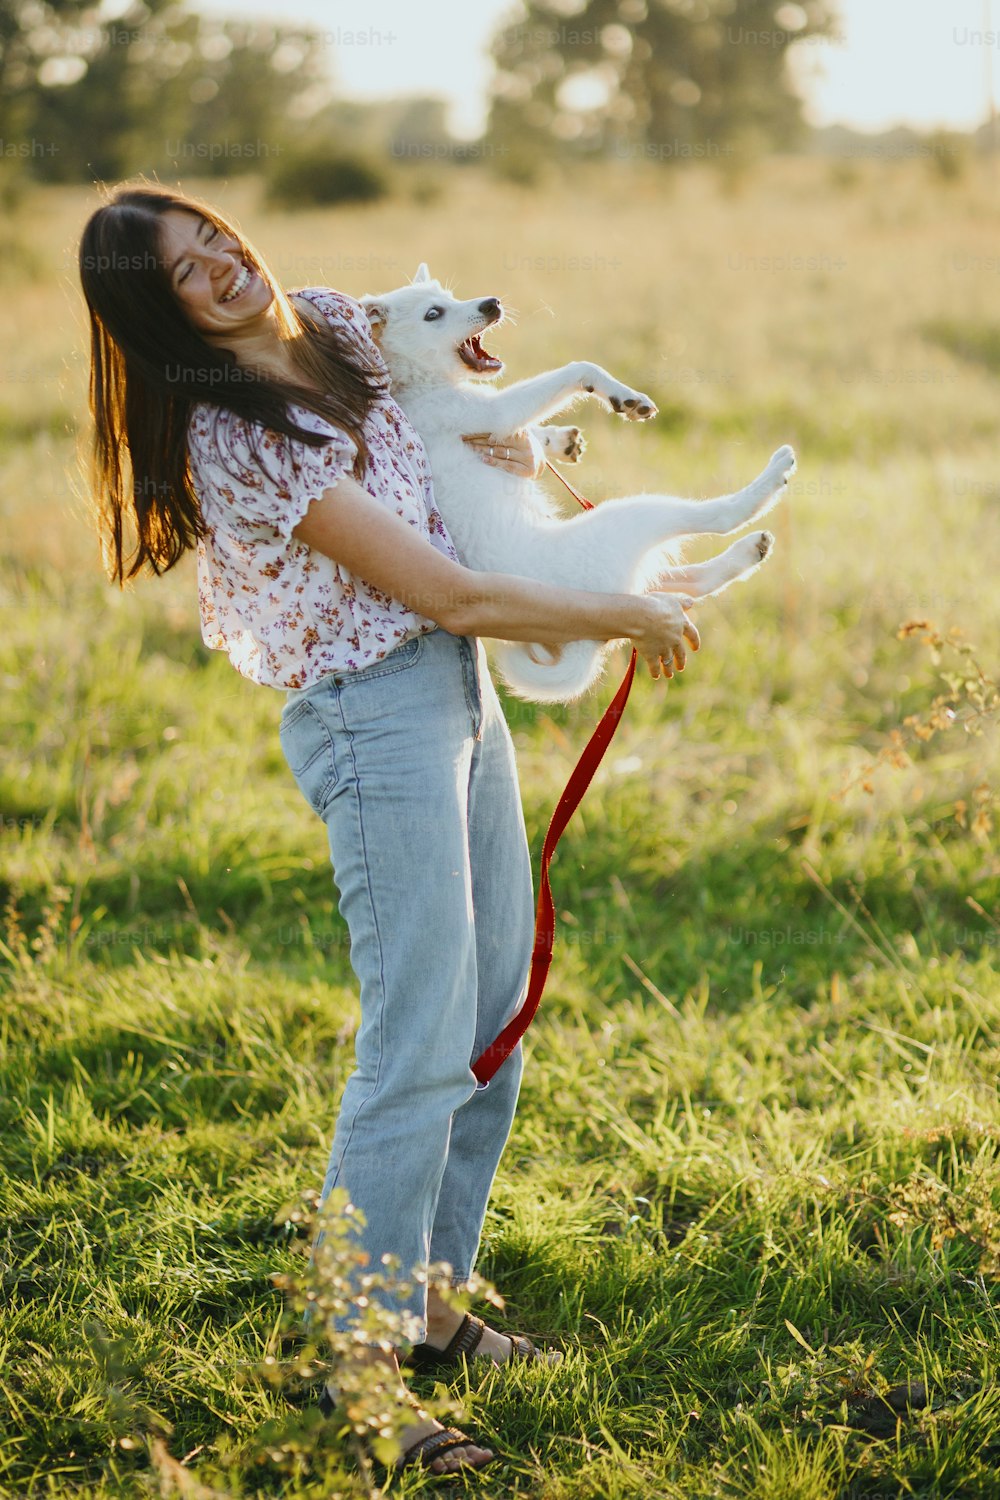 Girl holding playful adorable fluffy puppy, hilarious moment. Playing with doggy. Happy young woman holding funny white puppy in warm sunset light in summer meadow.